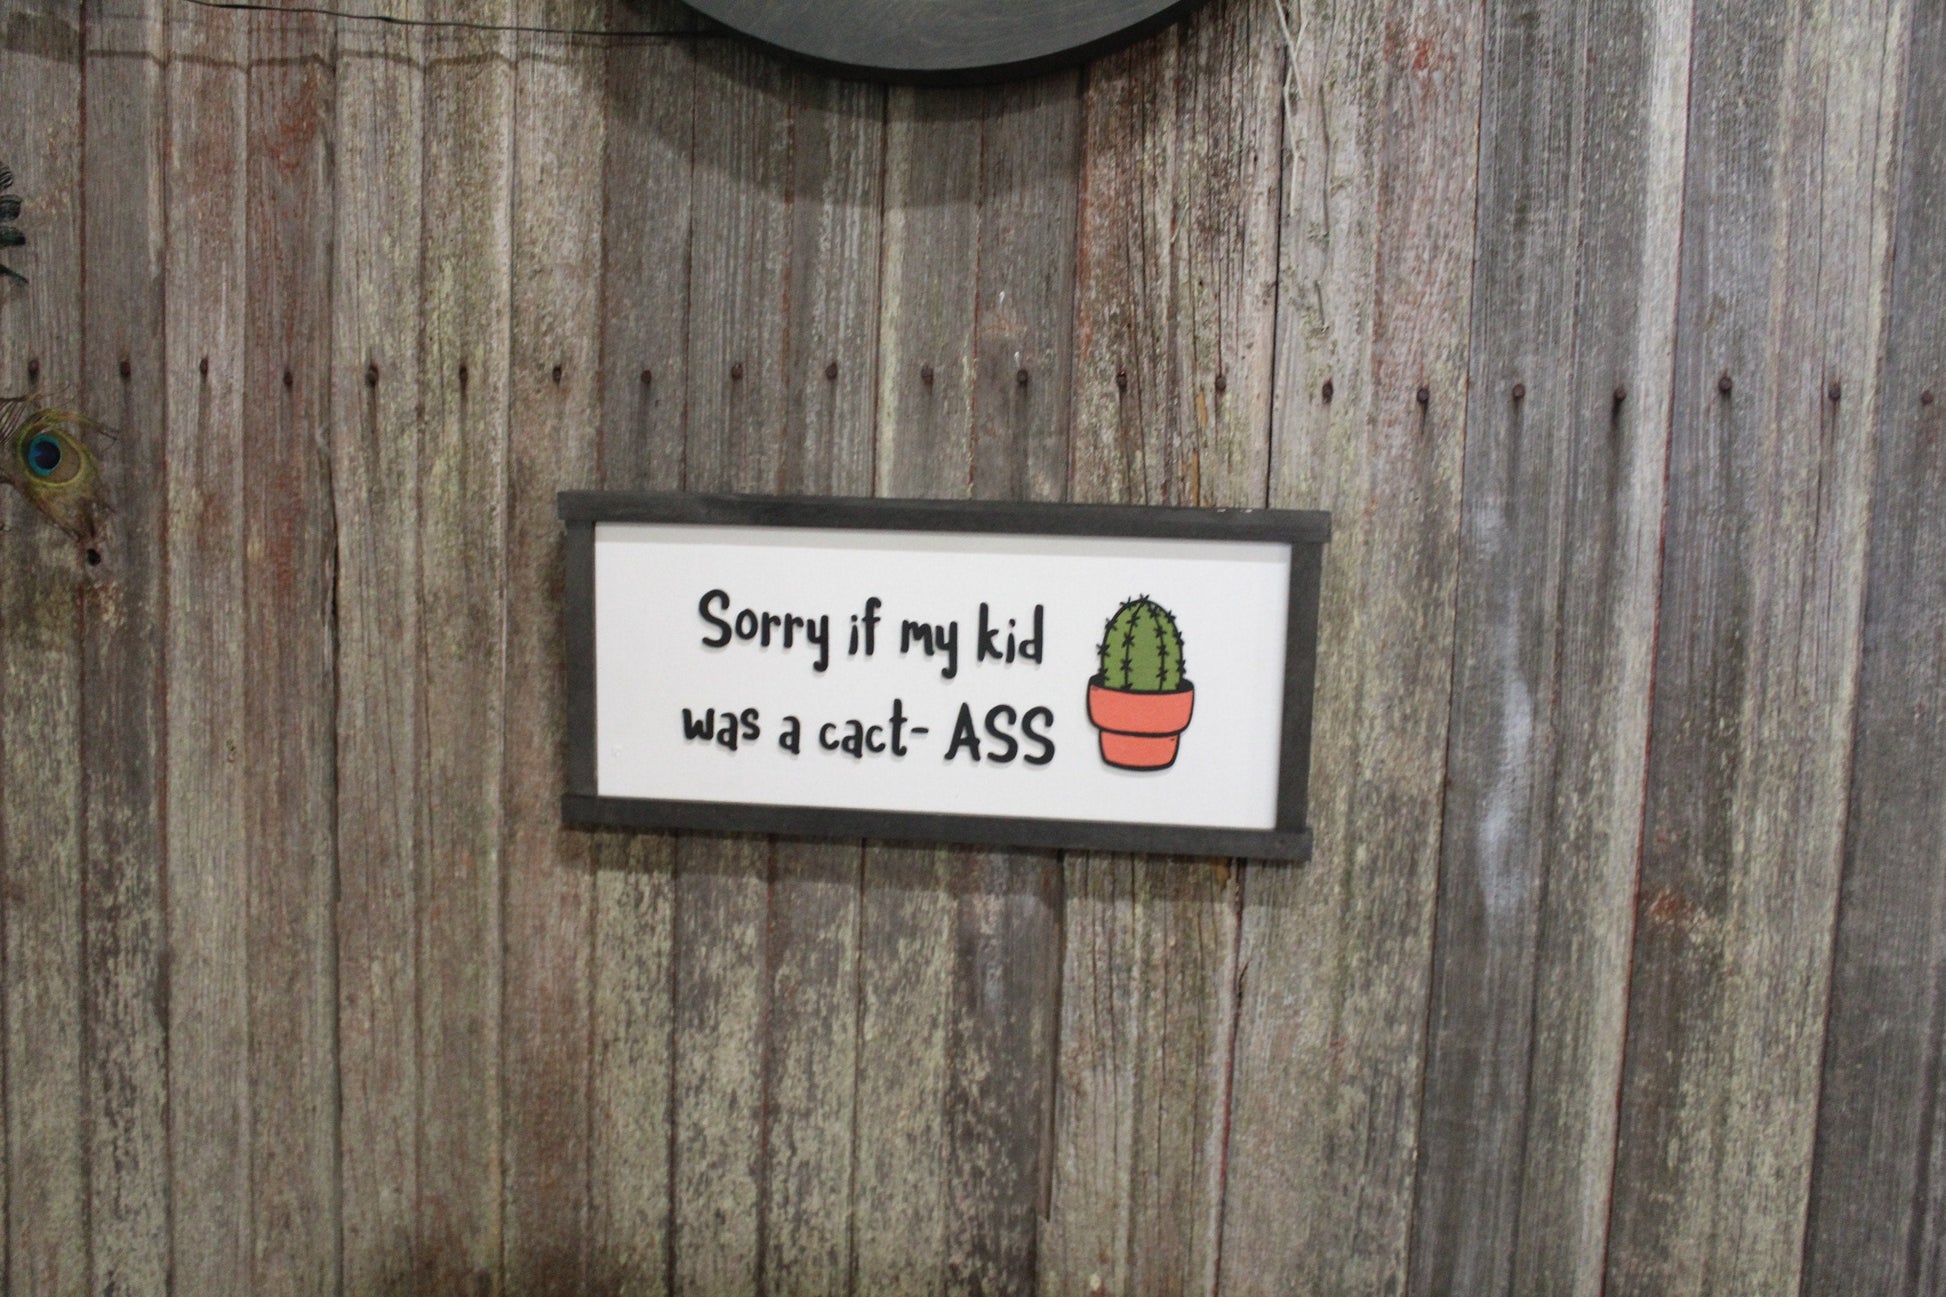 Sorry Cactus Funny Joke Sense of Humor Parenting Plant lover Prickly Crazy Kid Raised Text Kids Room Playroom Decor Home Apology 3D Handmade